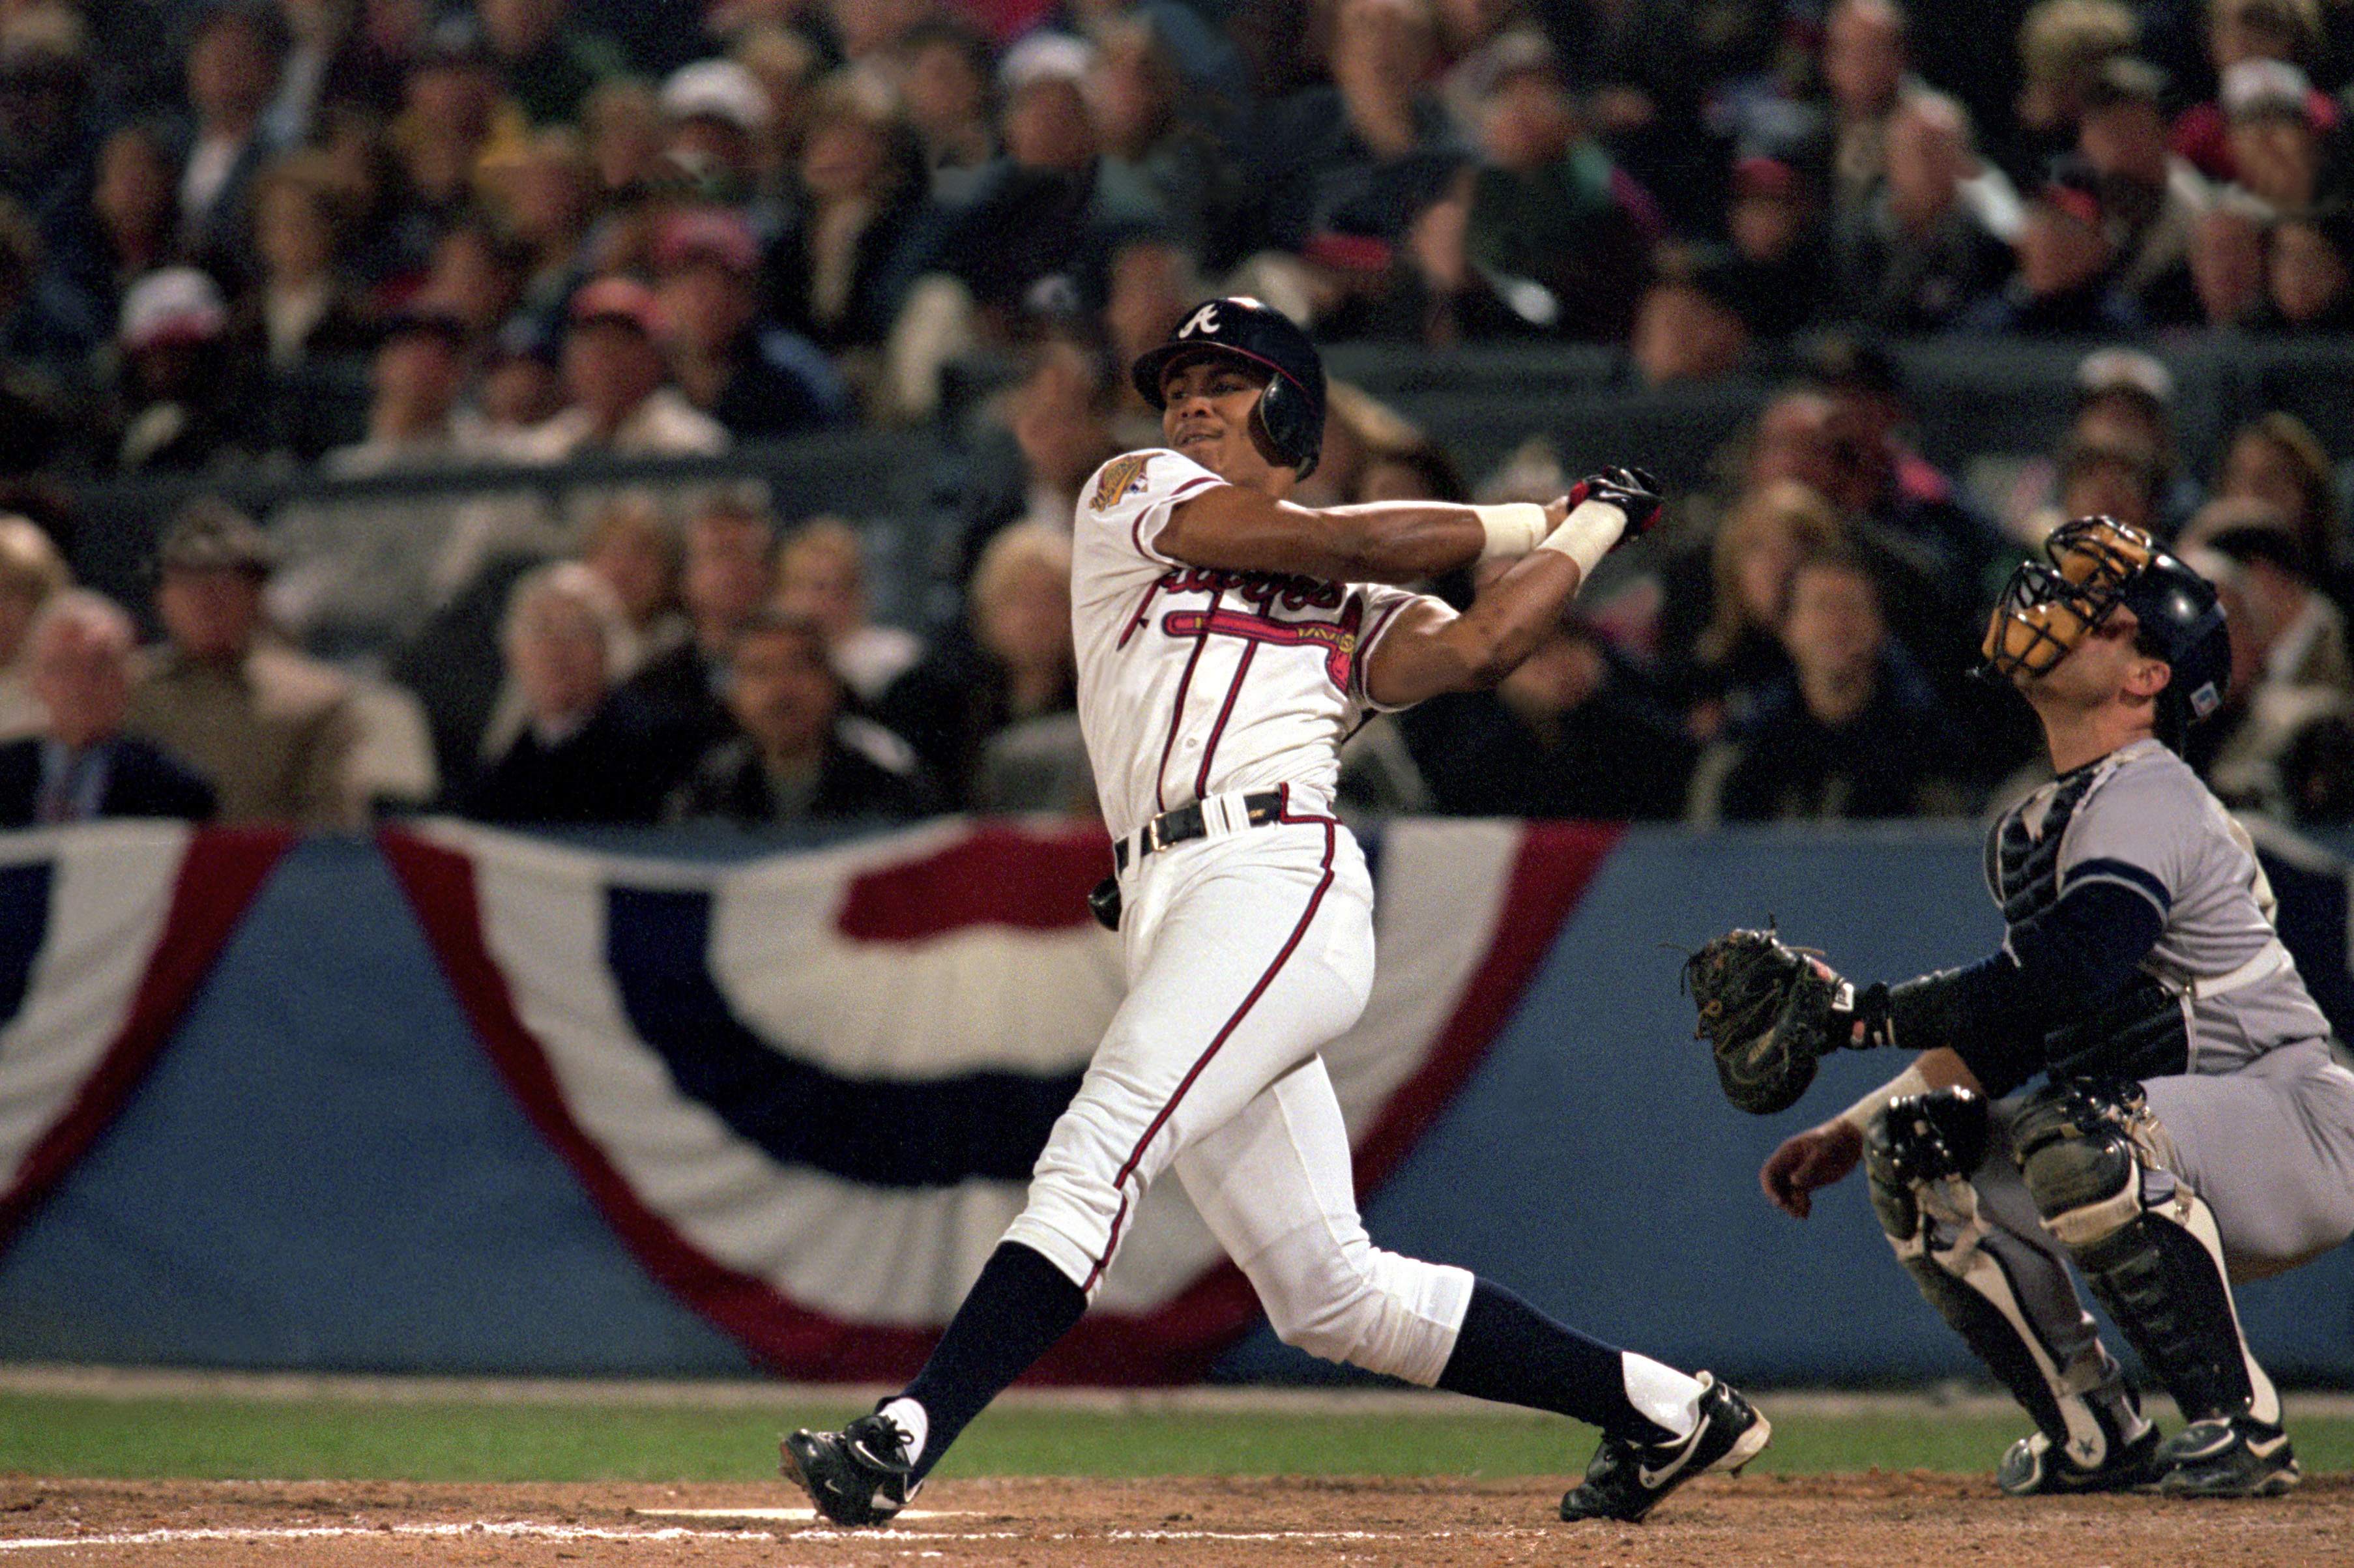 Braves to give away Andruw Jones bobblehead in celebration of his